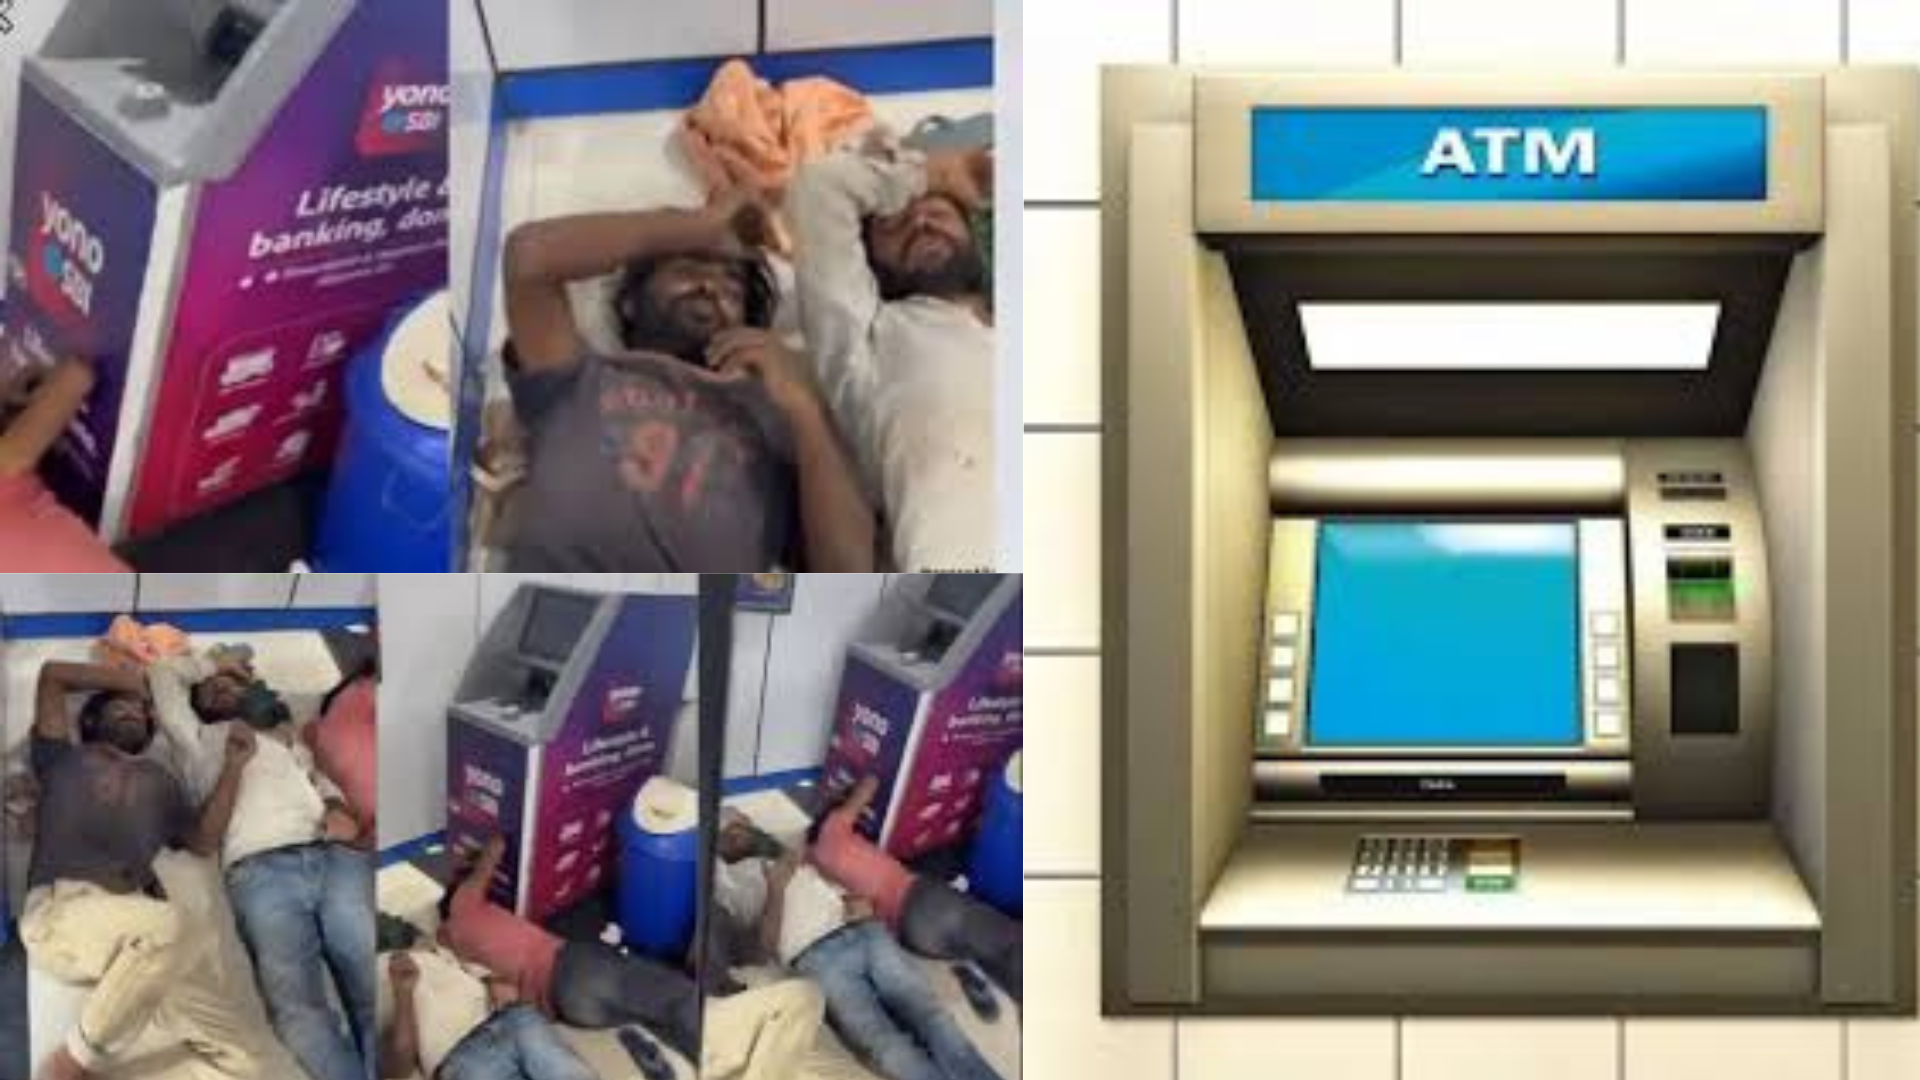 Men Sleeping In Air-Conditioned Patiala ATM: Viral Video Prompts Security Review